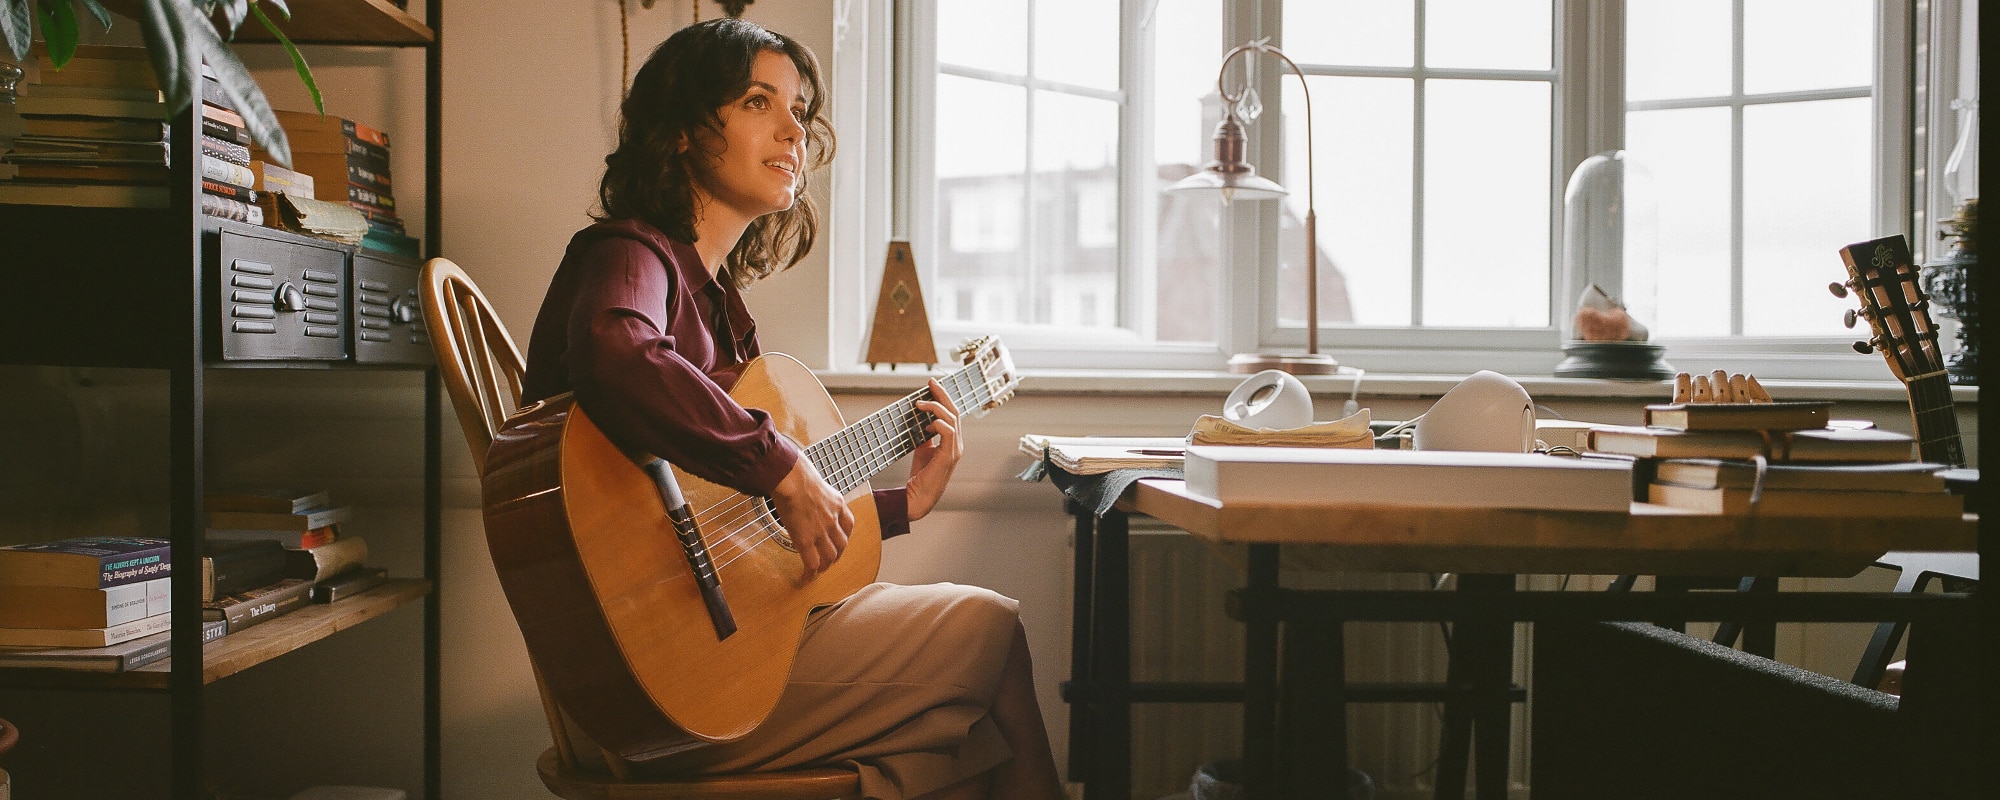 Katie Melua Offers Songwriters Suggestions On Taking Ownership of Their Craft